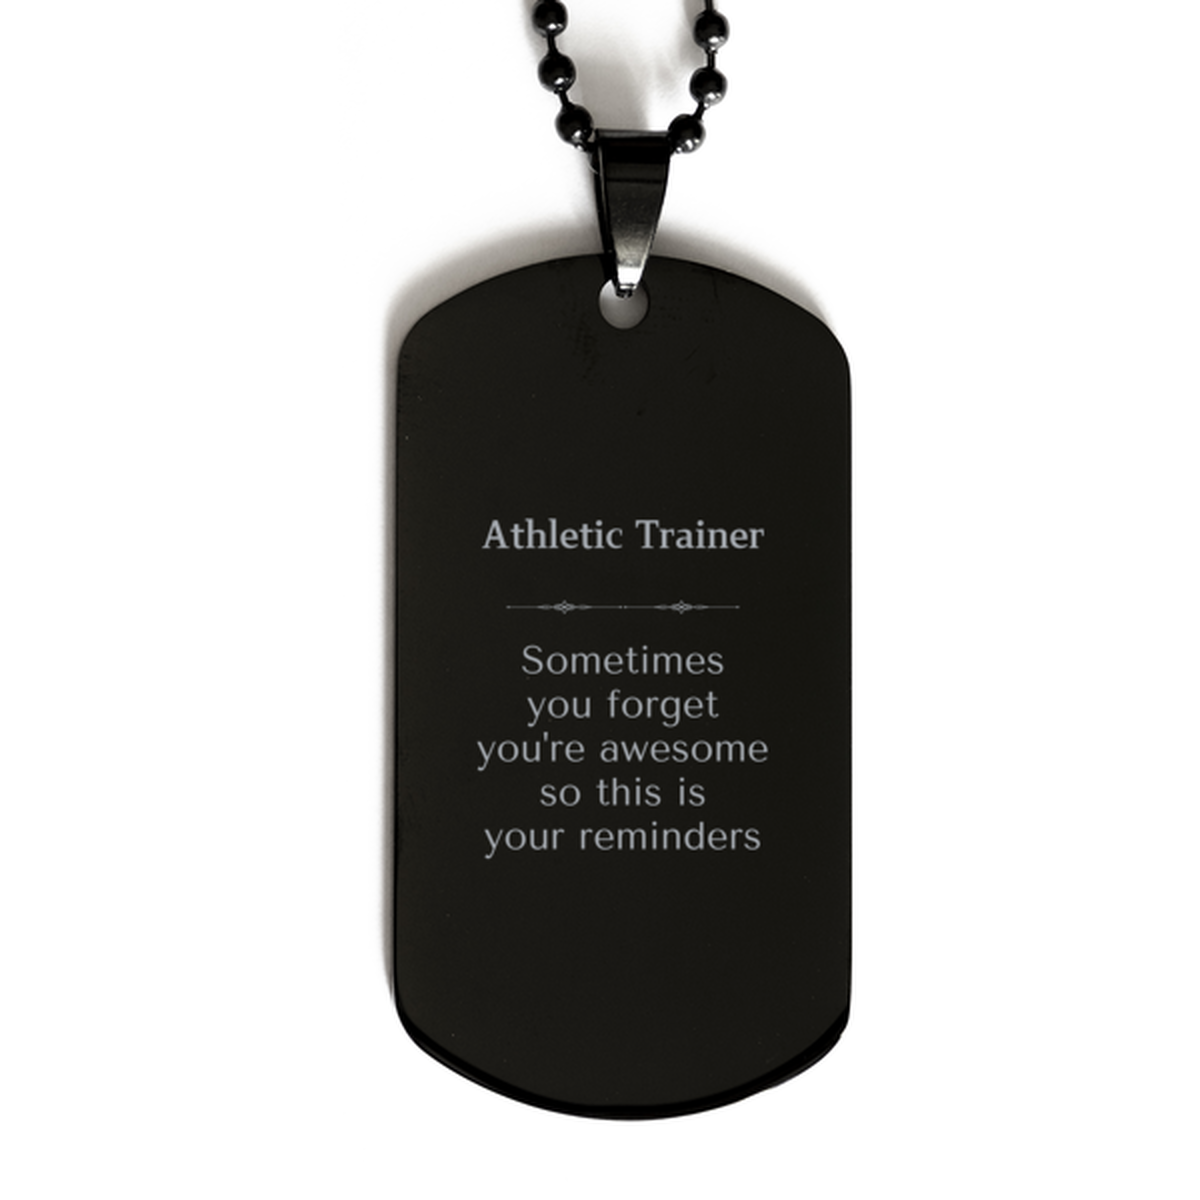 Sentimental Athletic Trainer Black Dog Tag, Athletic Trainer Sometimes you forget you're awesome so this is your reminders, Graduation Christmas Birthday Gifts for Athletic Trainer, Men, Women, Coworkers